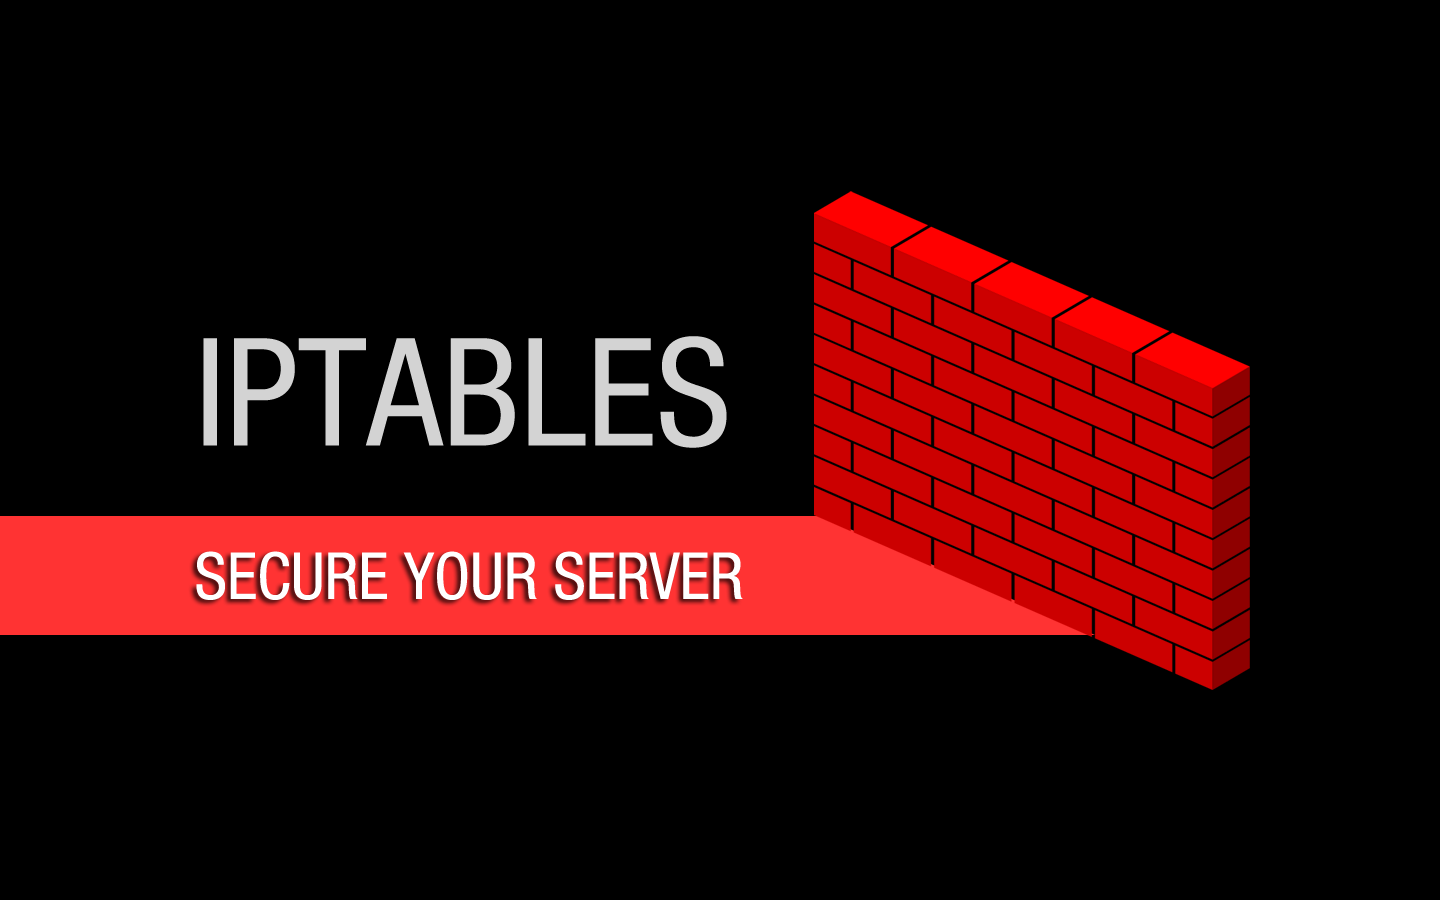 Secure Your Server with Iptables Firewall